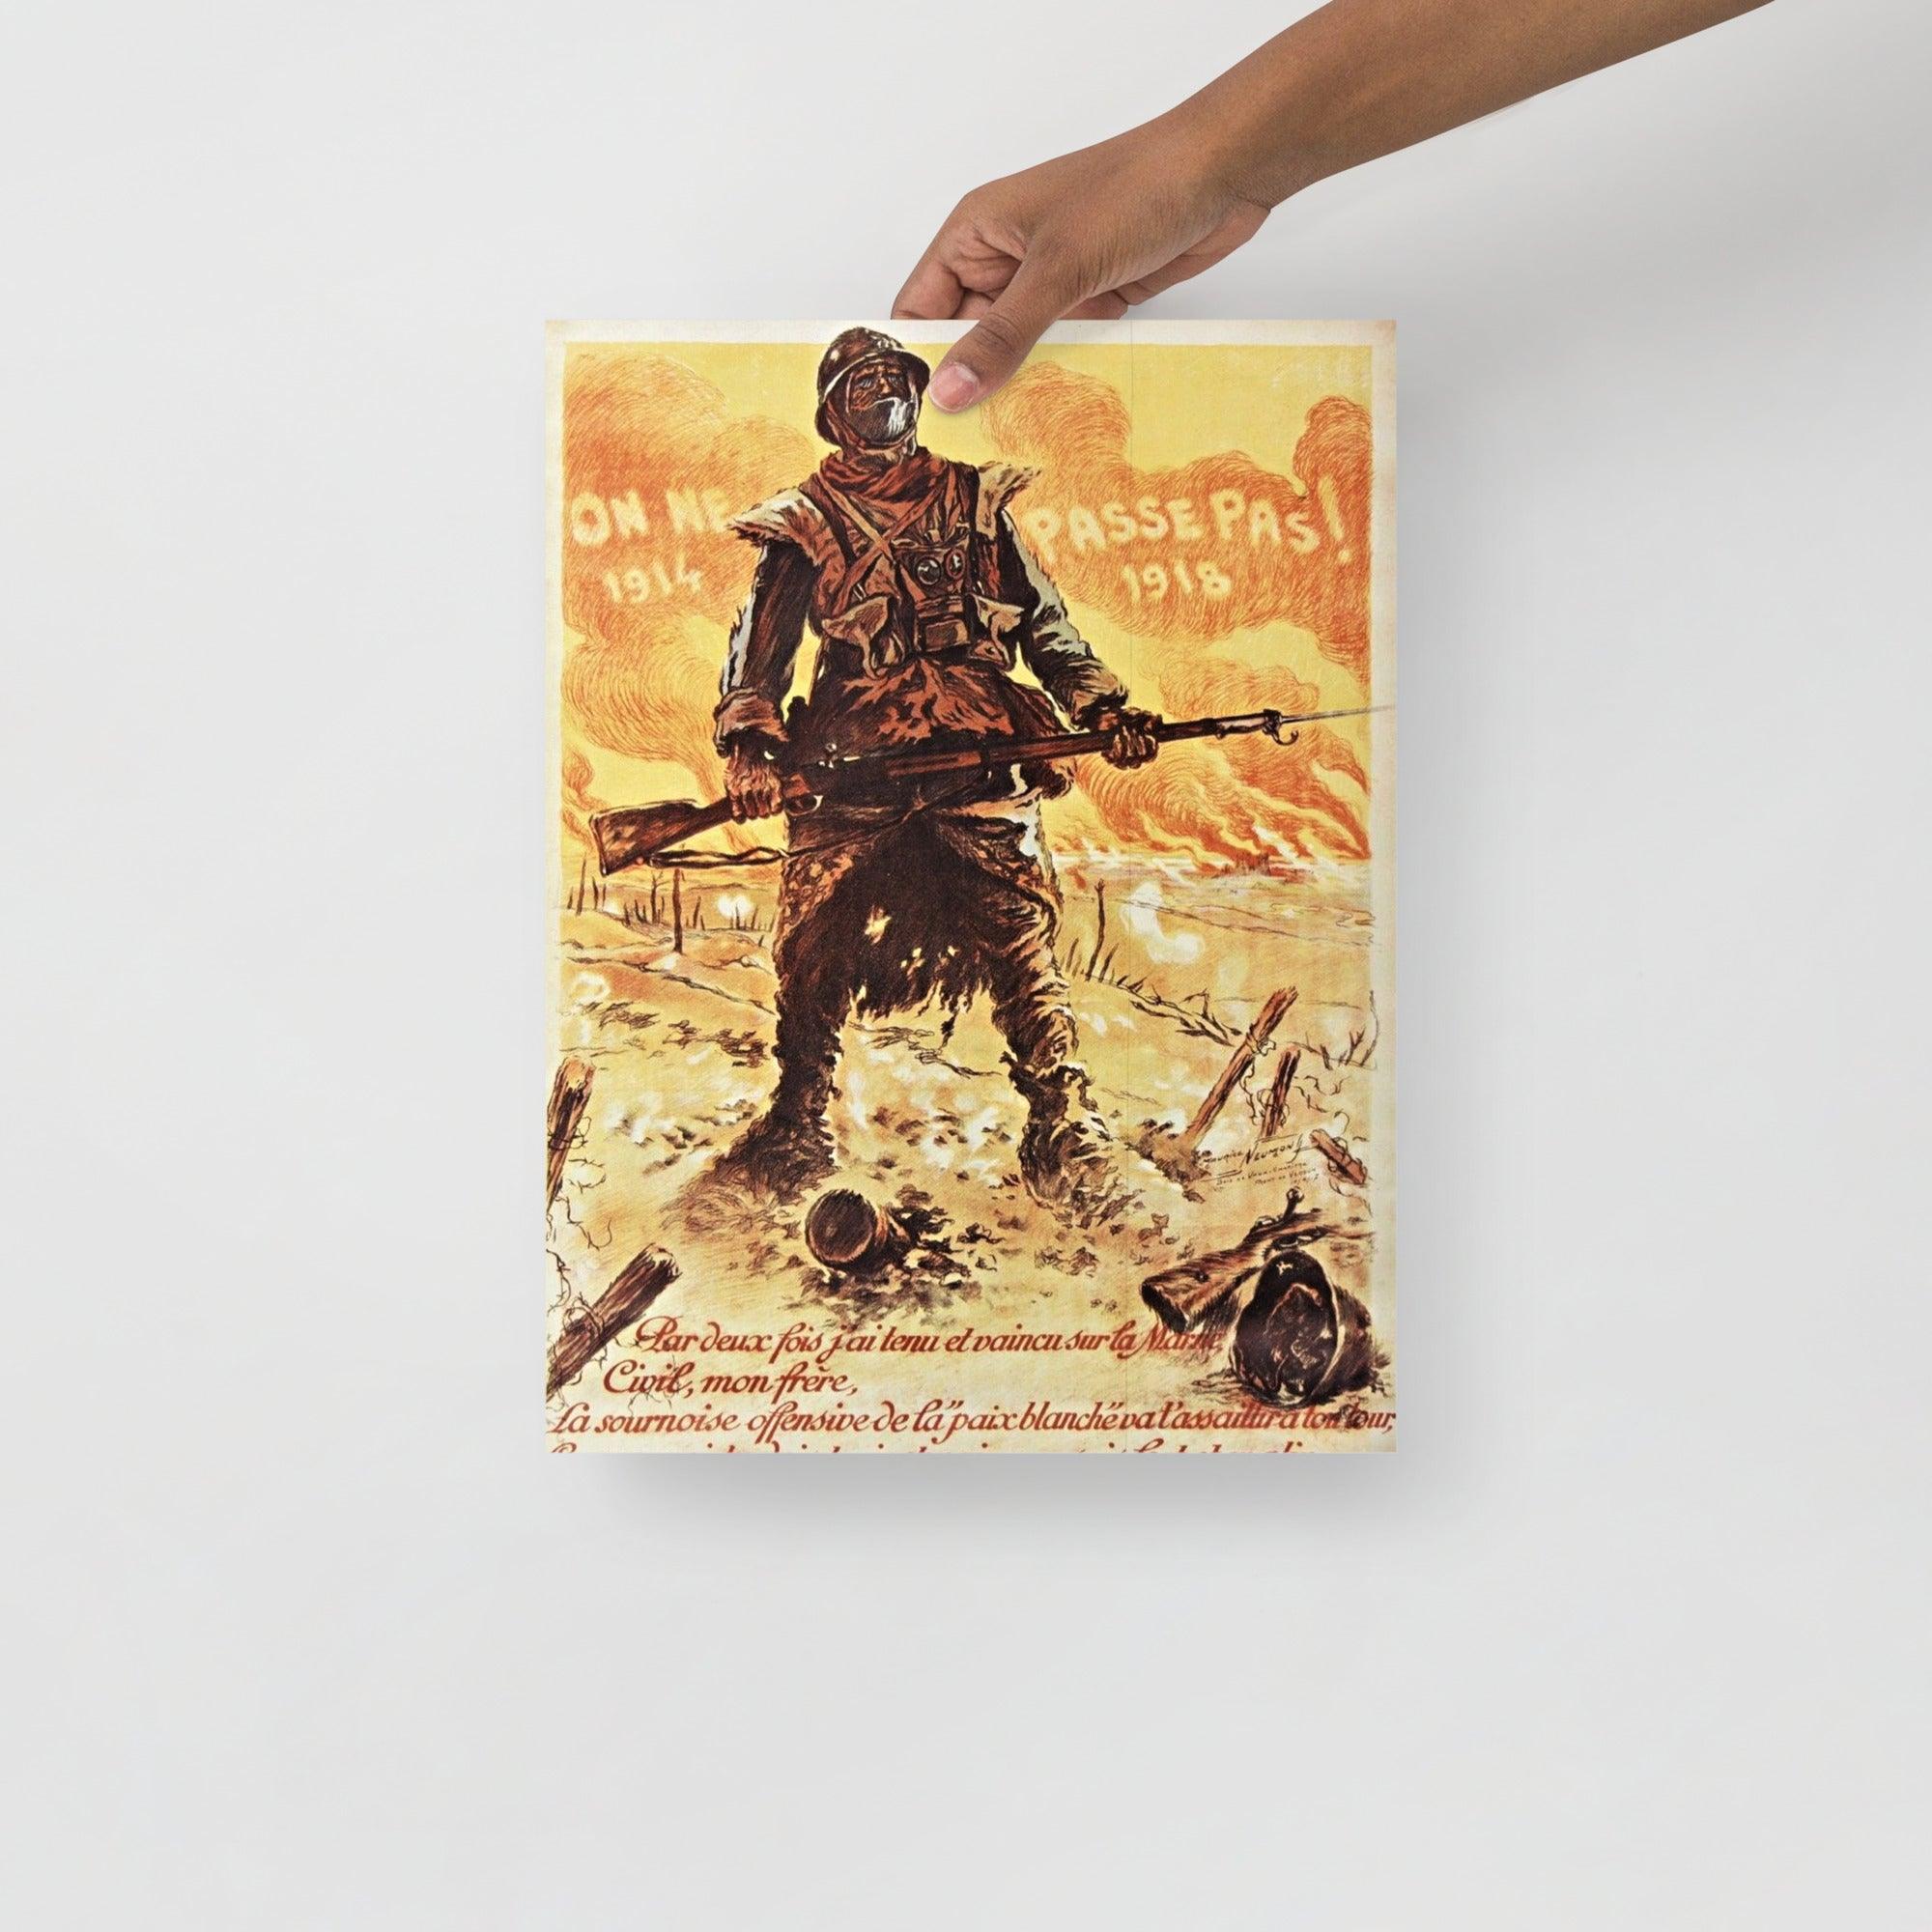 A They Shall Not Pass (On Ne Passe Pas) By Maurice Neumont poster on a plain backdrop in size 12x16”.